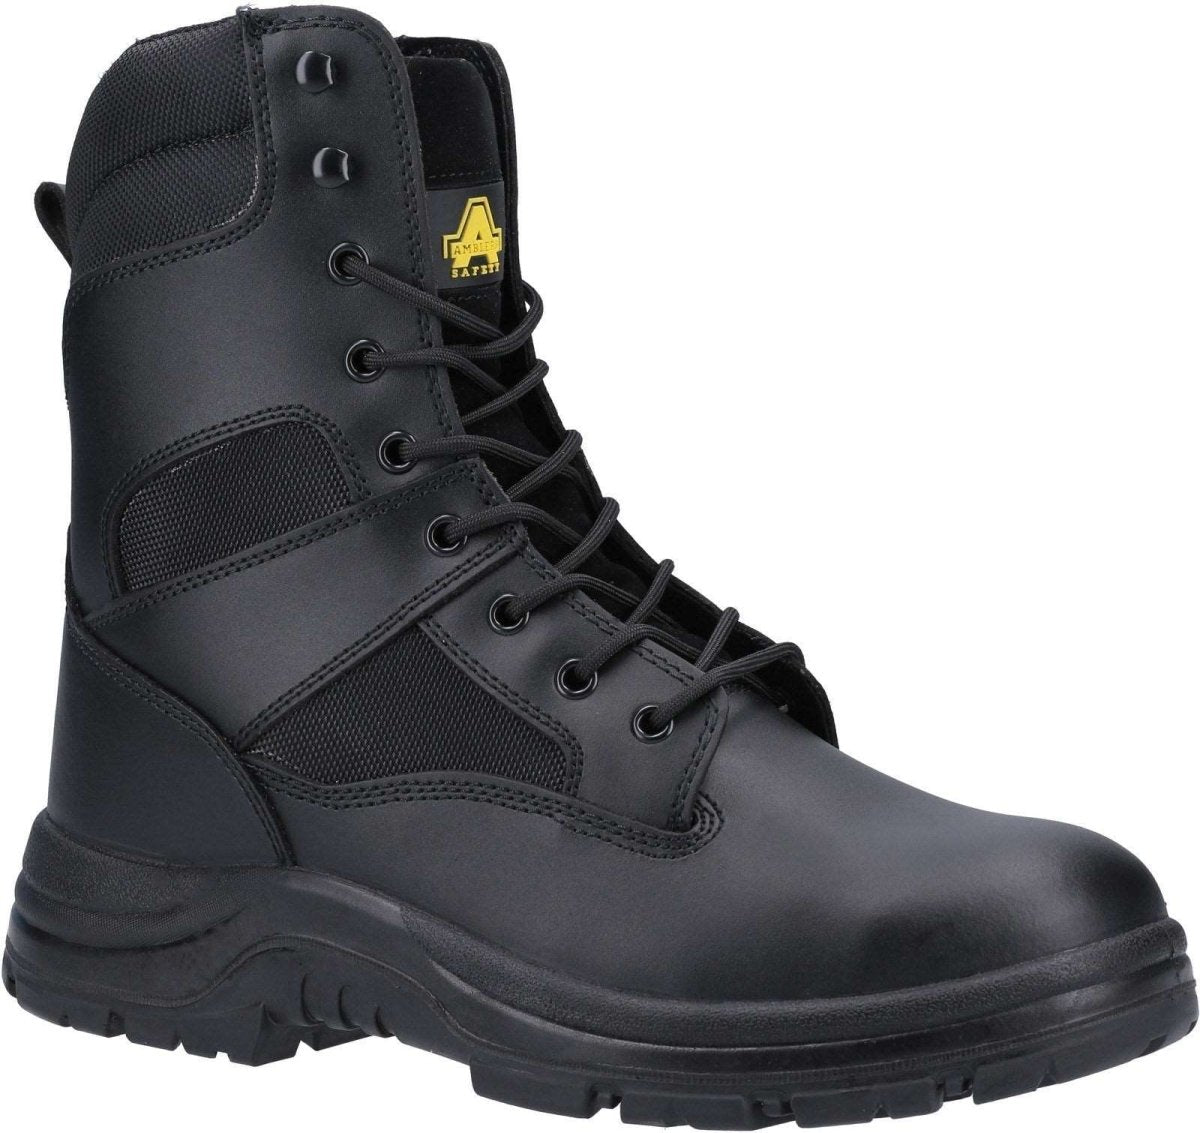 Amblers FS008 Water Resistant Hi-Leg Safety Boots - Shoe Store Direct